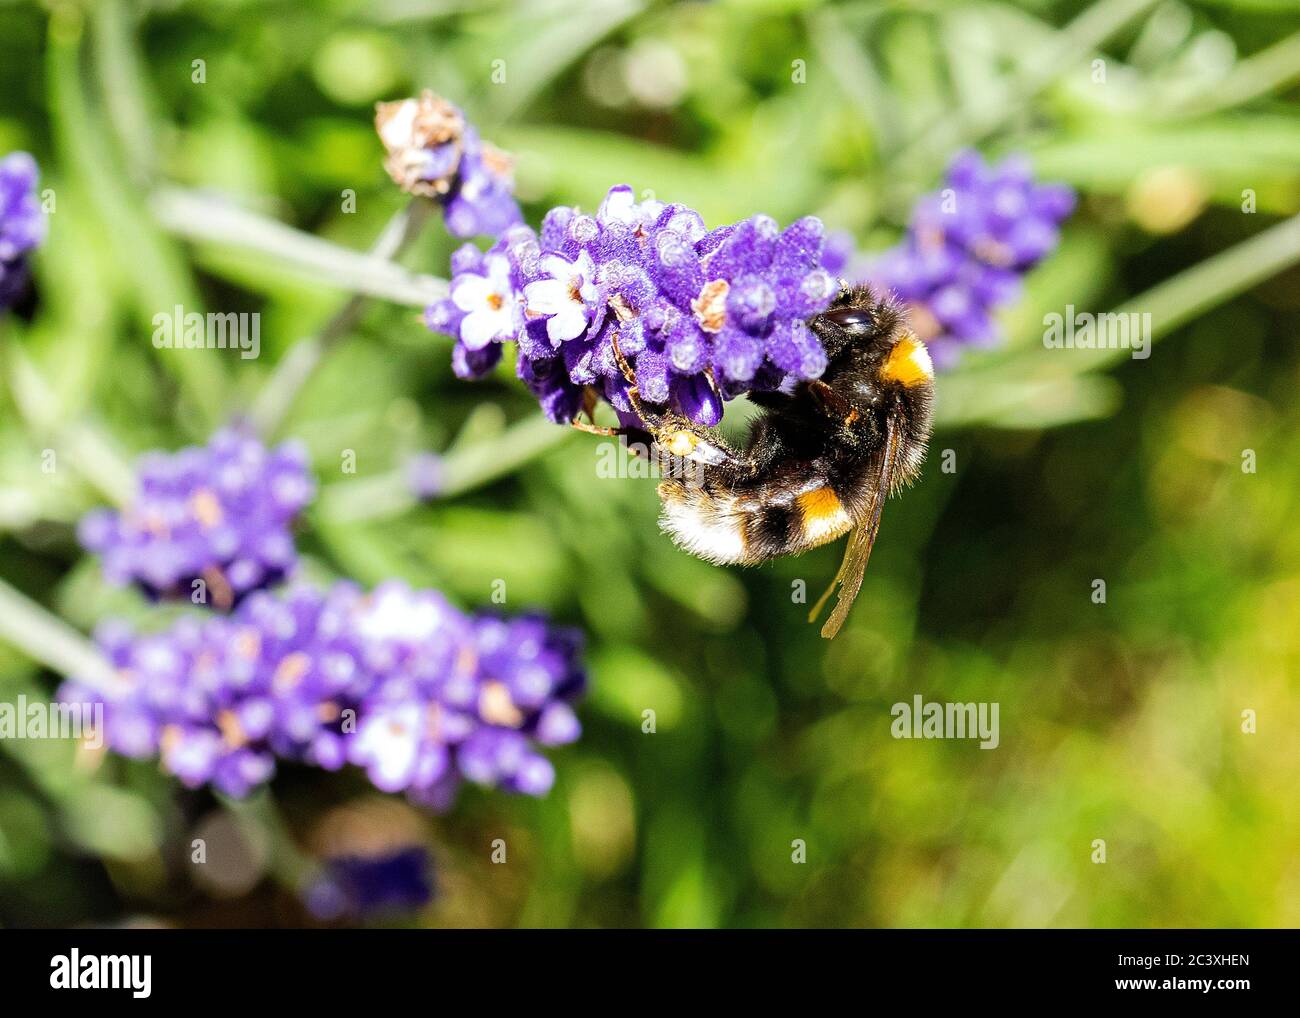 Busy Bumble Bee on lavender Stock Photo